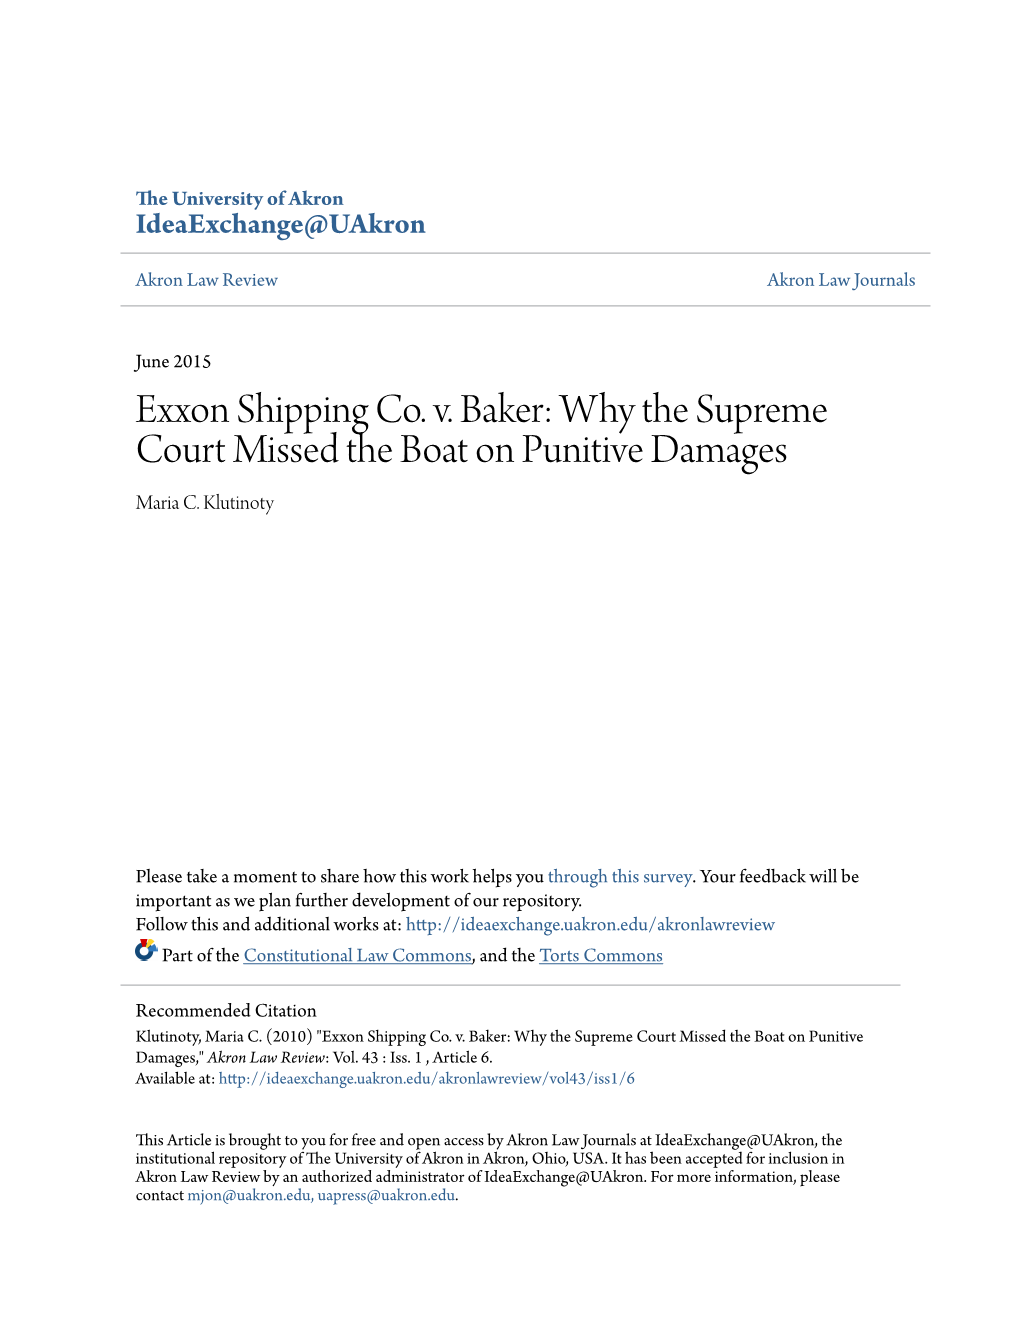 Exxon Shipping Co. V. Baker: Why the Supreme Court Missed the Boat on Punitive Damages Maria C